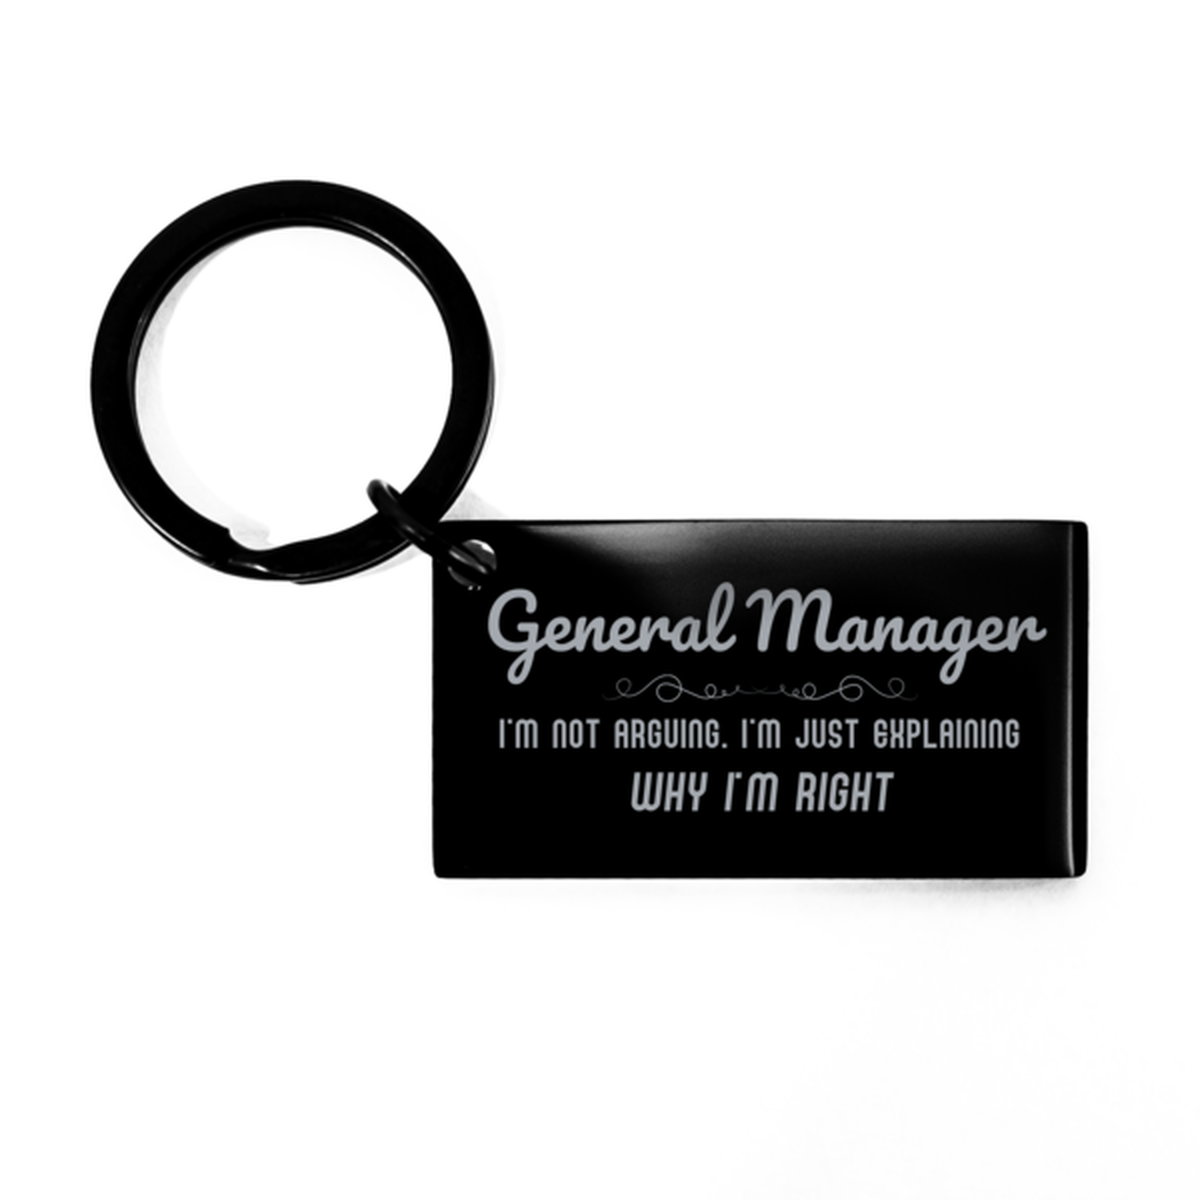 General Manager I'm not Arguing. I'm Just Explaining Why I'm RIGHT Keychain, Funny Saying Quote General Manager Gifts For General Manager Graduation Birthday Christmas Gifts for Men Women Coworker